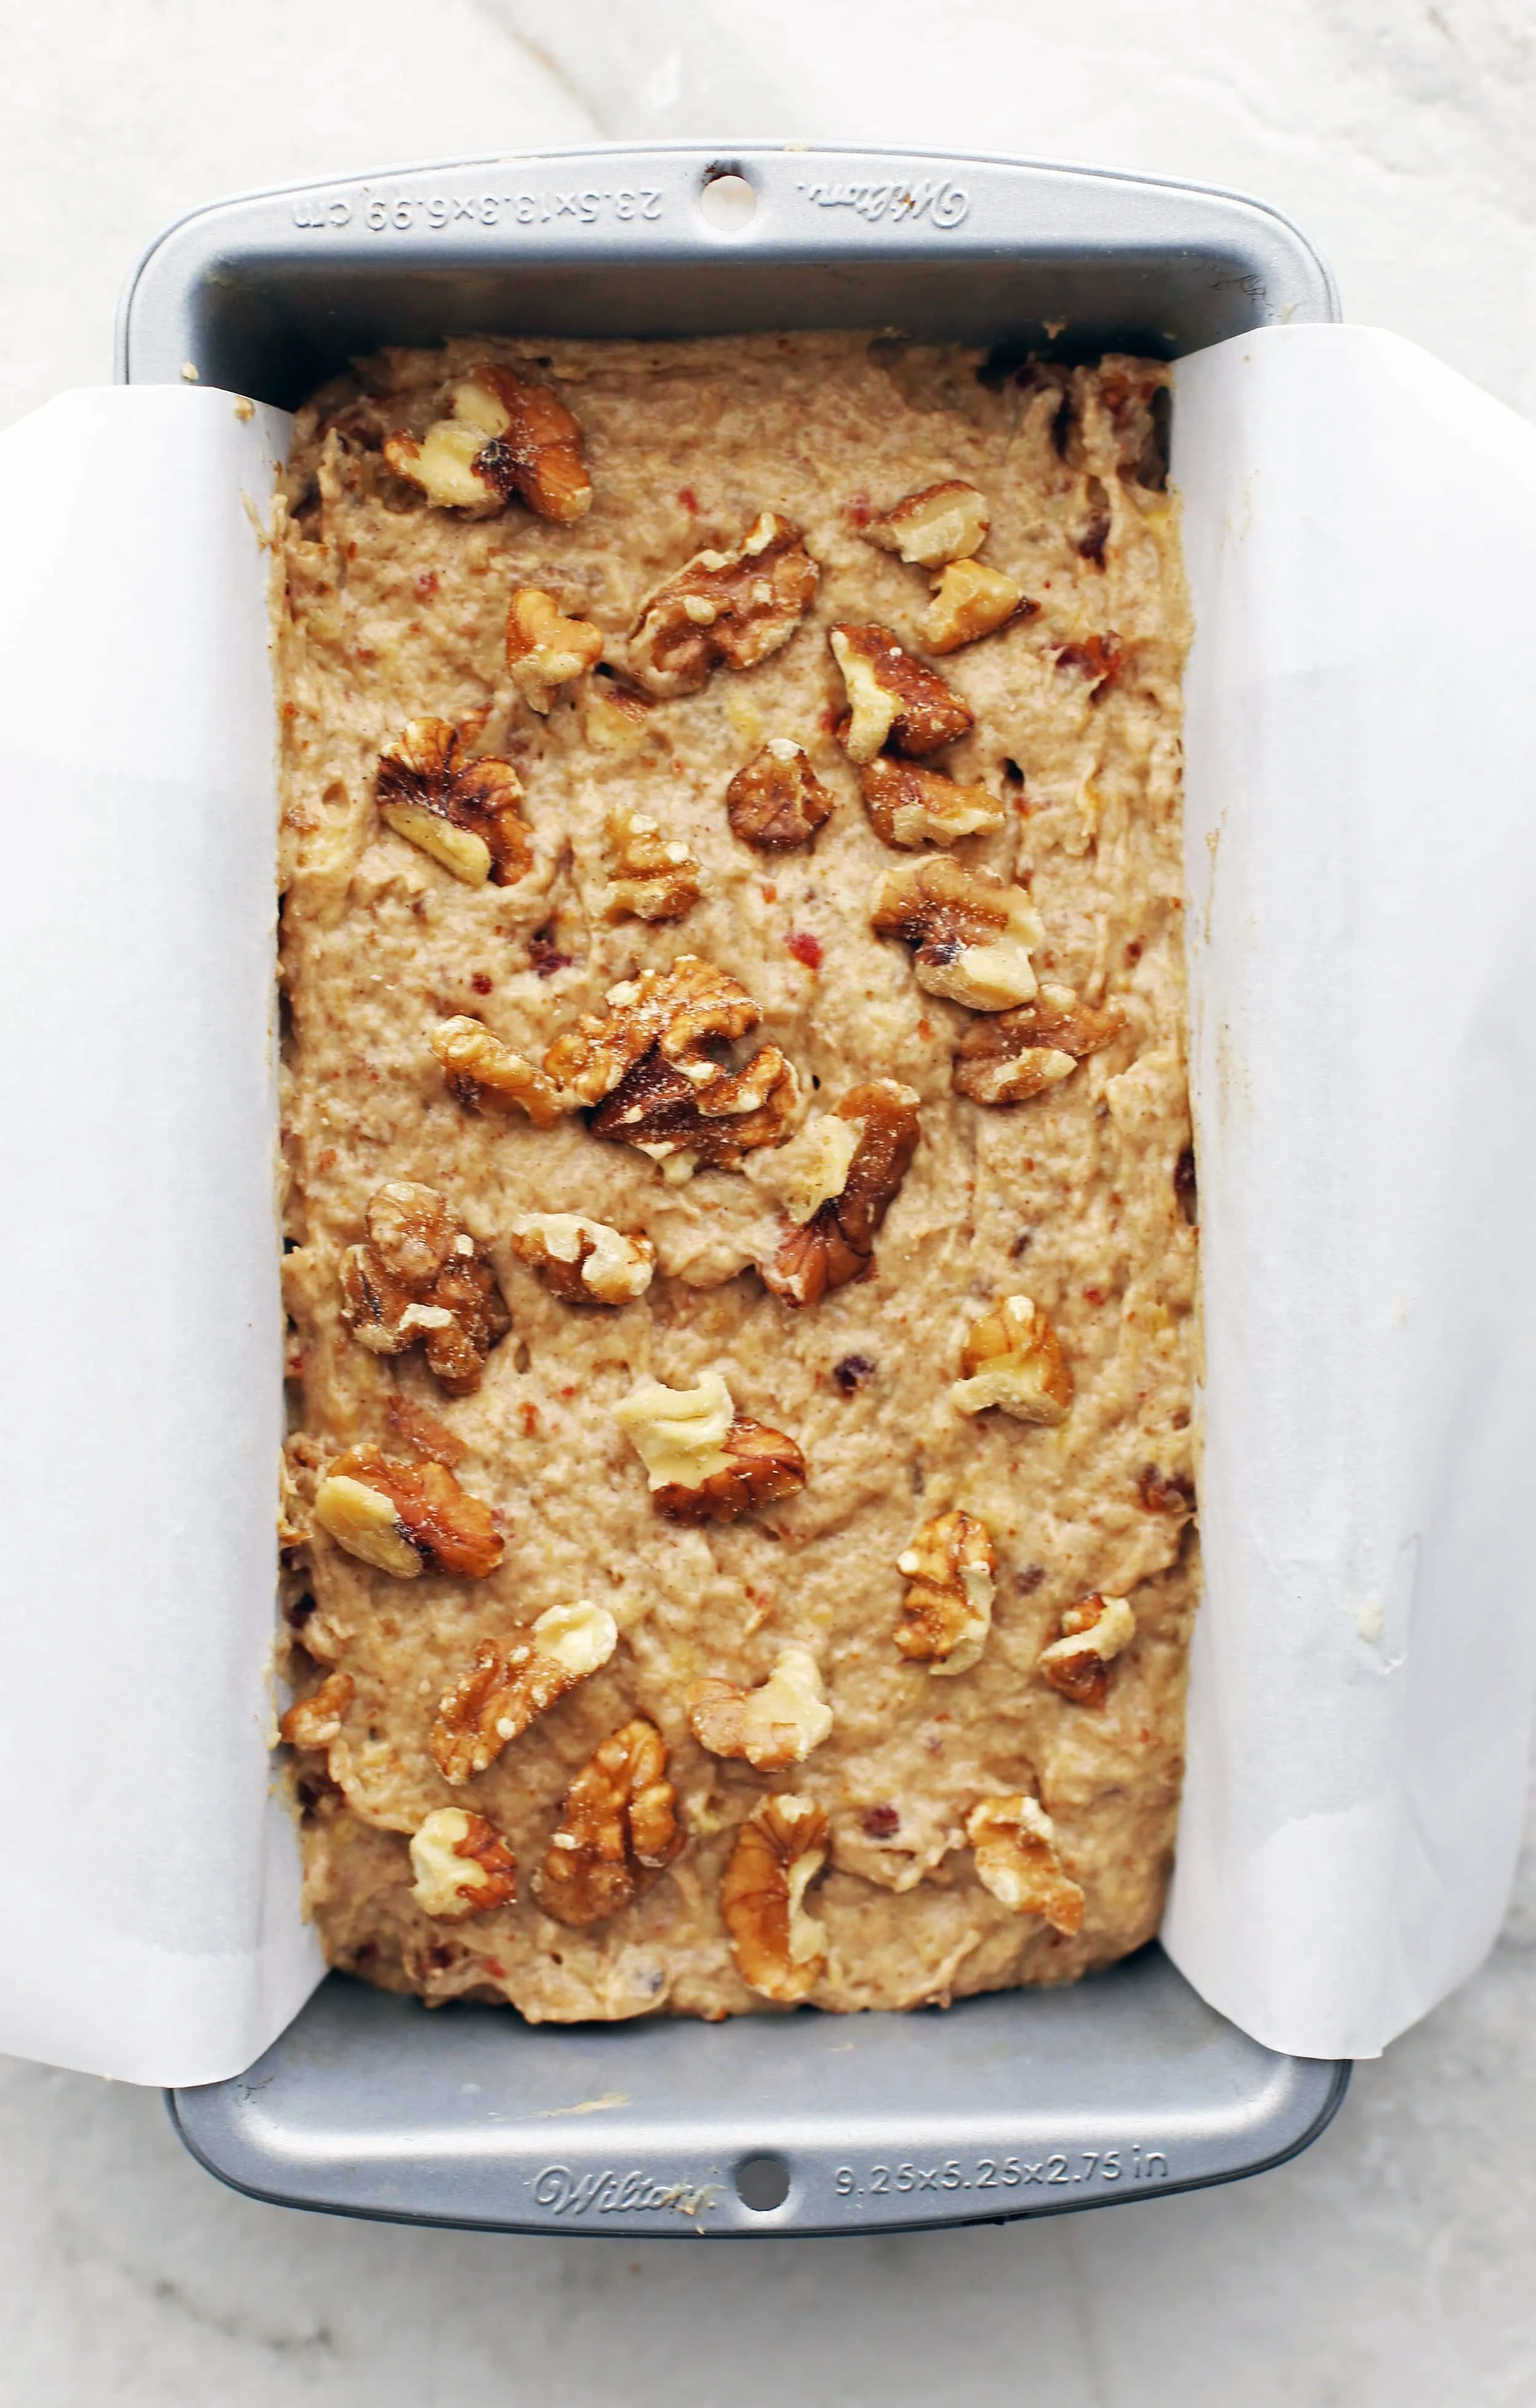 Date Banana Nut Bread dough topped with walnuts in a parchment paper-lined loaf pan.